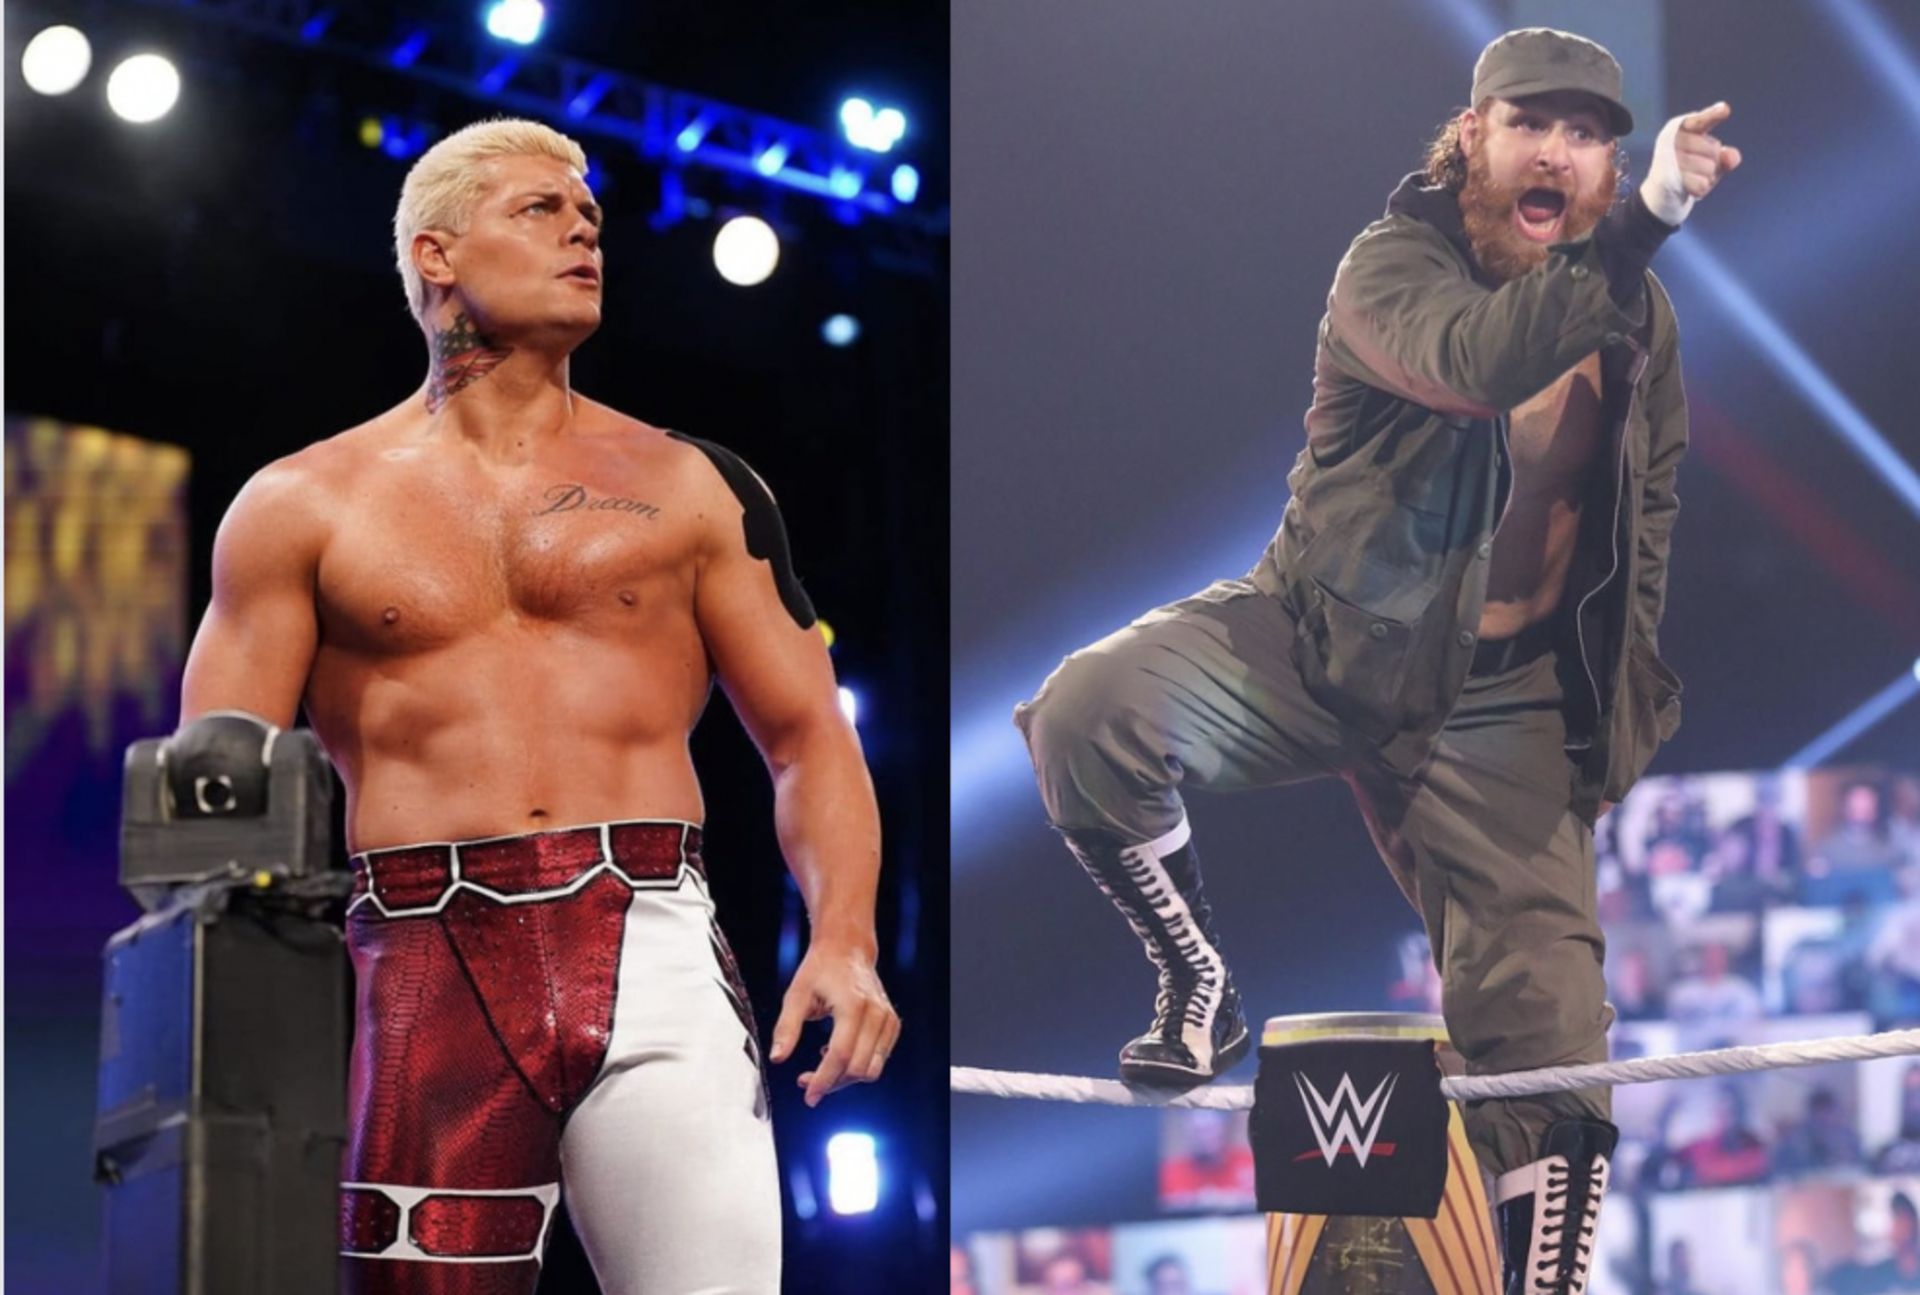 Cody Rhodes and Sami Zayn both feature in this edition of the WWE Rumor Review